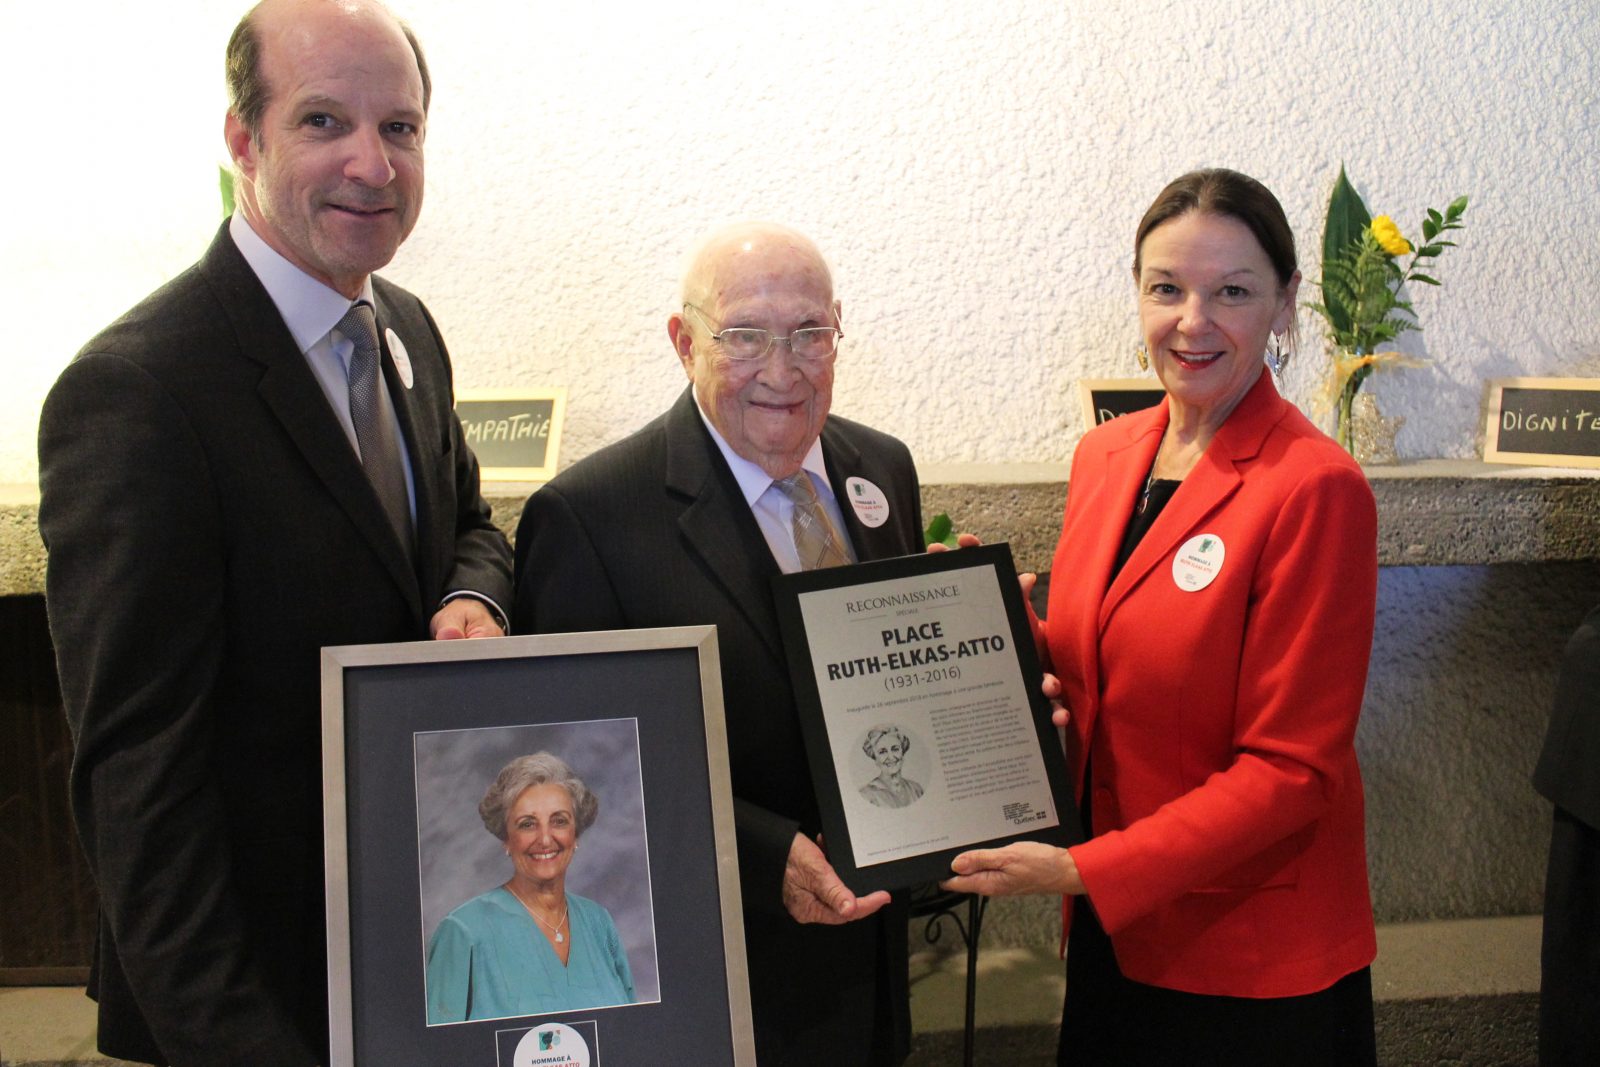 Ruth Atto honoured as first of CHUS’ “great volunteers”